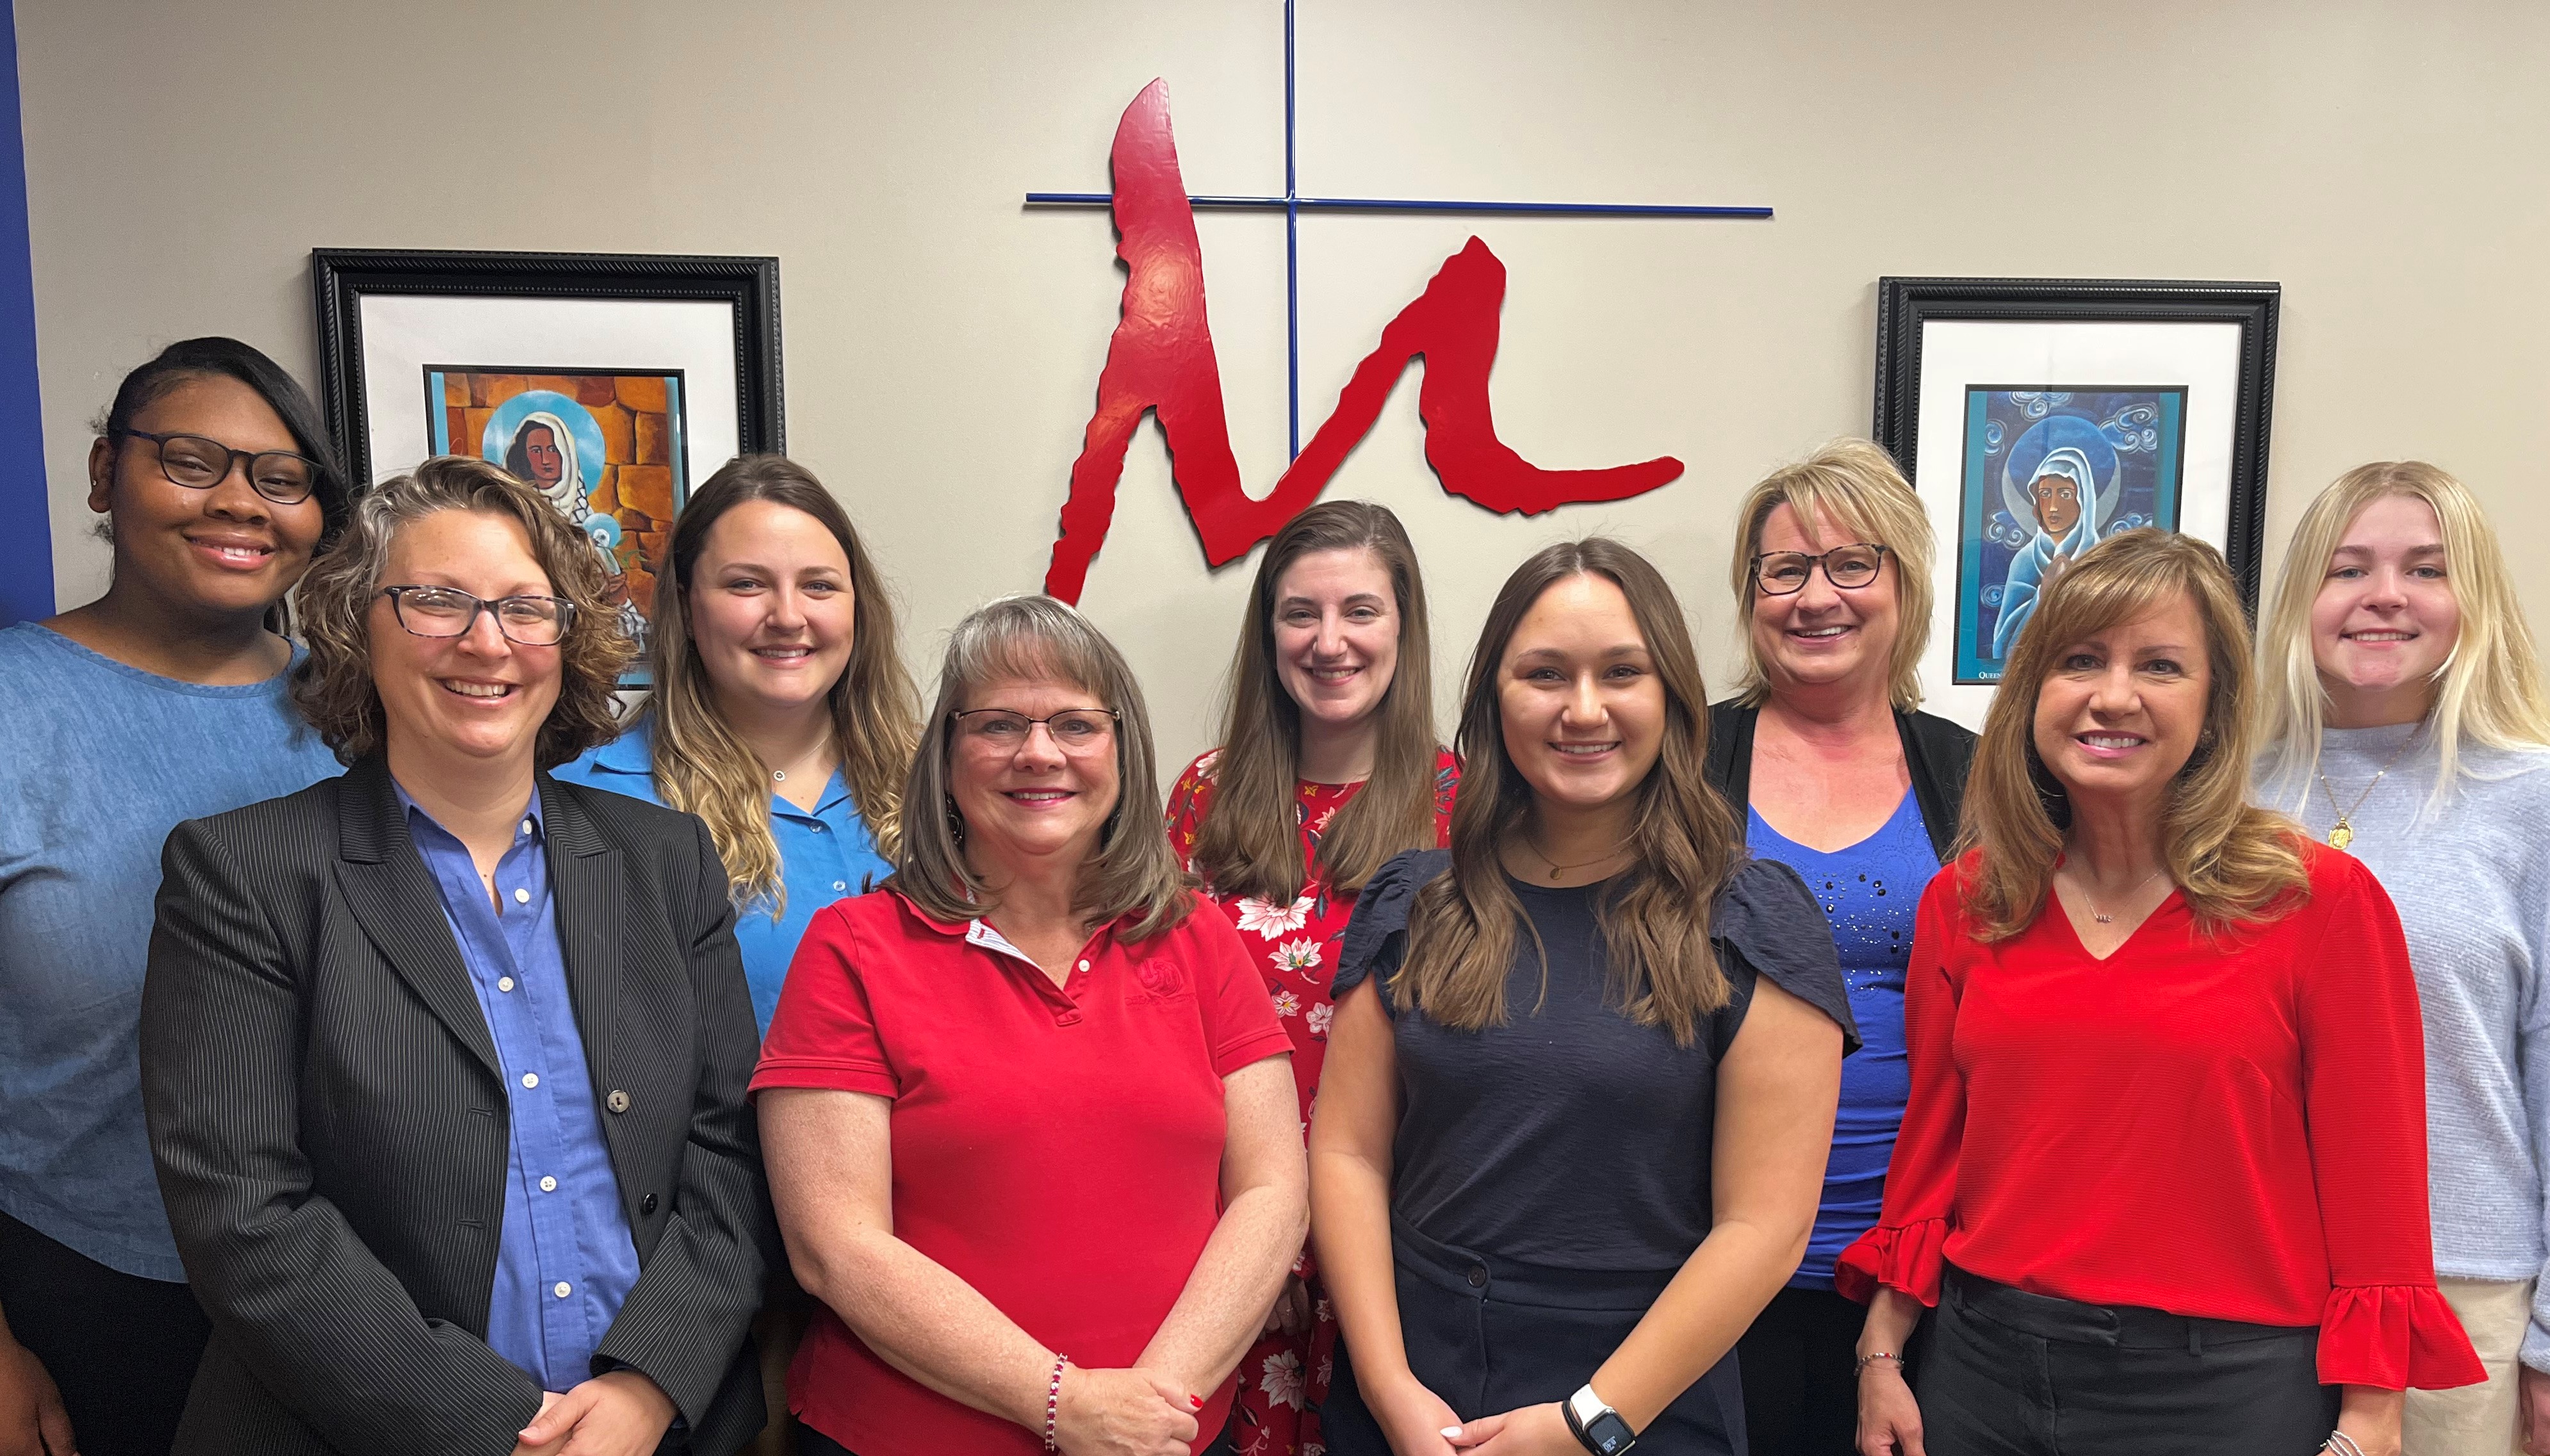 Photo of Flyer Student Services staff in red and blue. From left to right: Seaniece, Catherine, Lilly, Karen, Megan, Jillian, Tricia, Christine and Elle